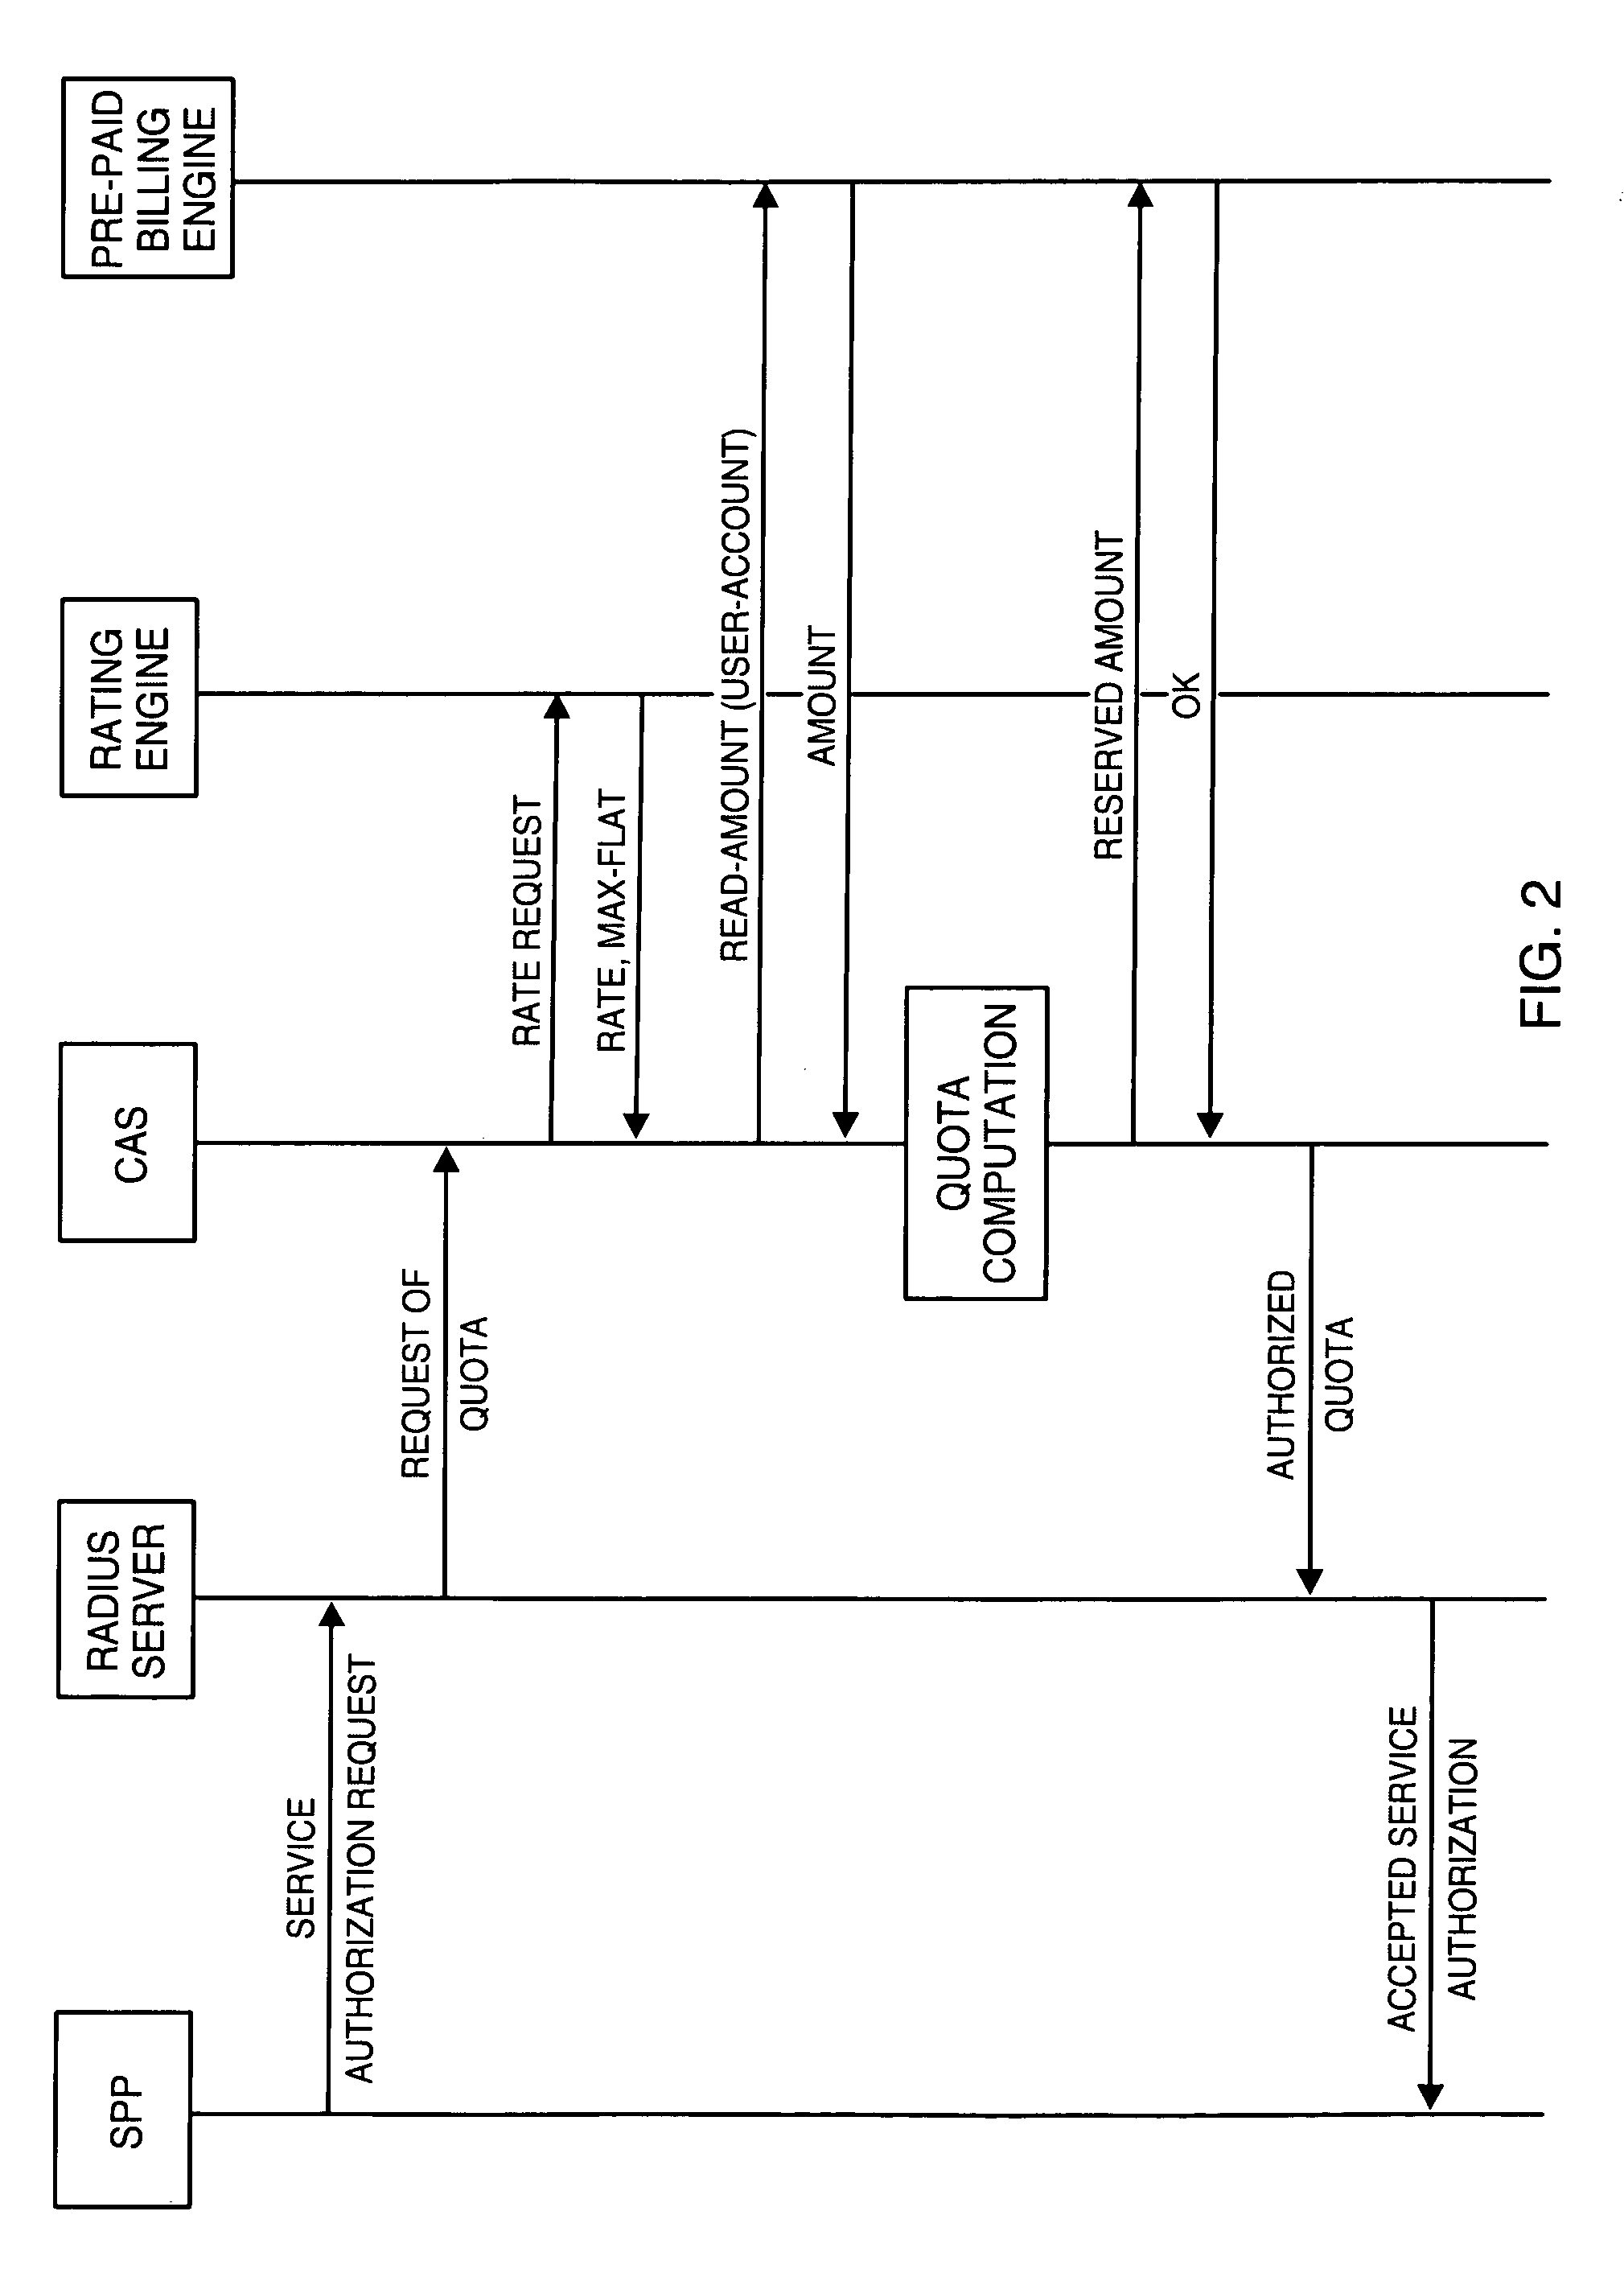 Method for computing a quota of service requested by a pre-paid user to a multi-service provider